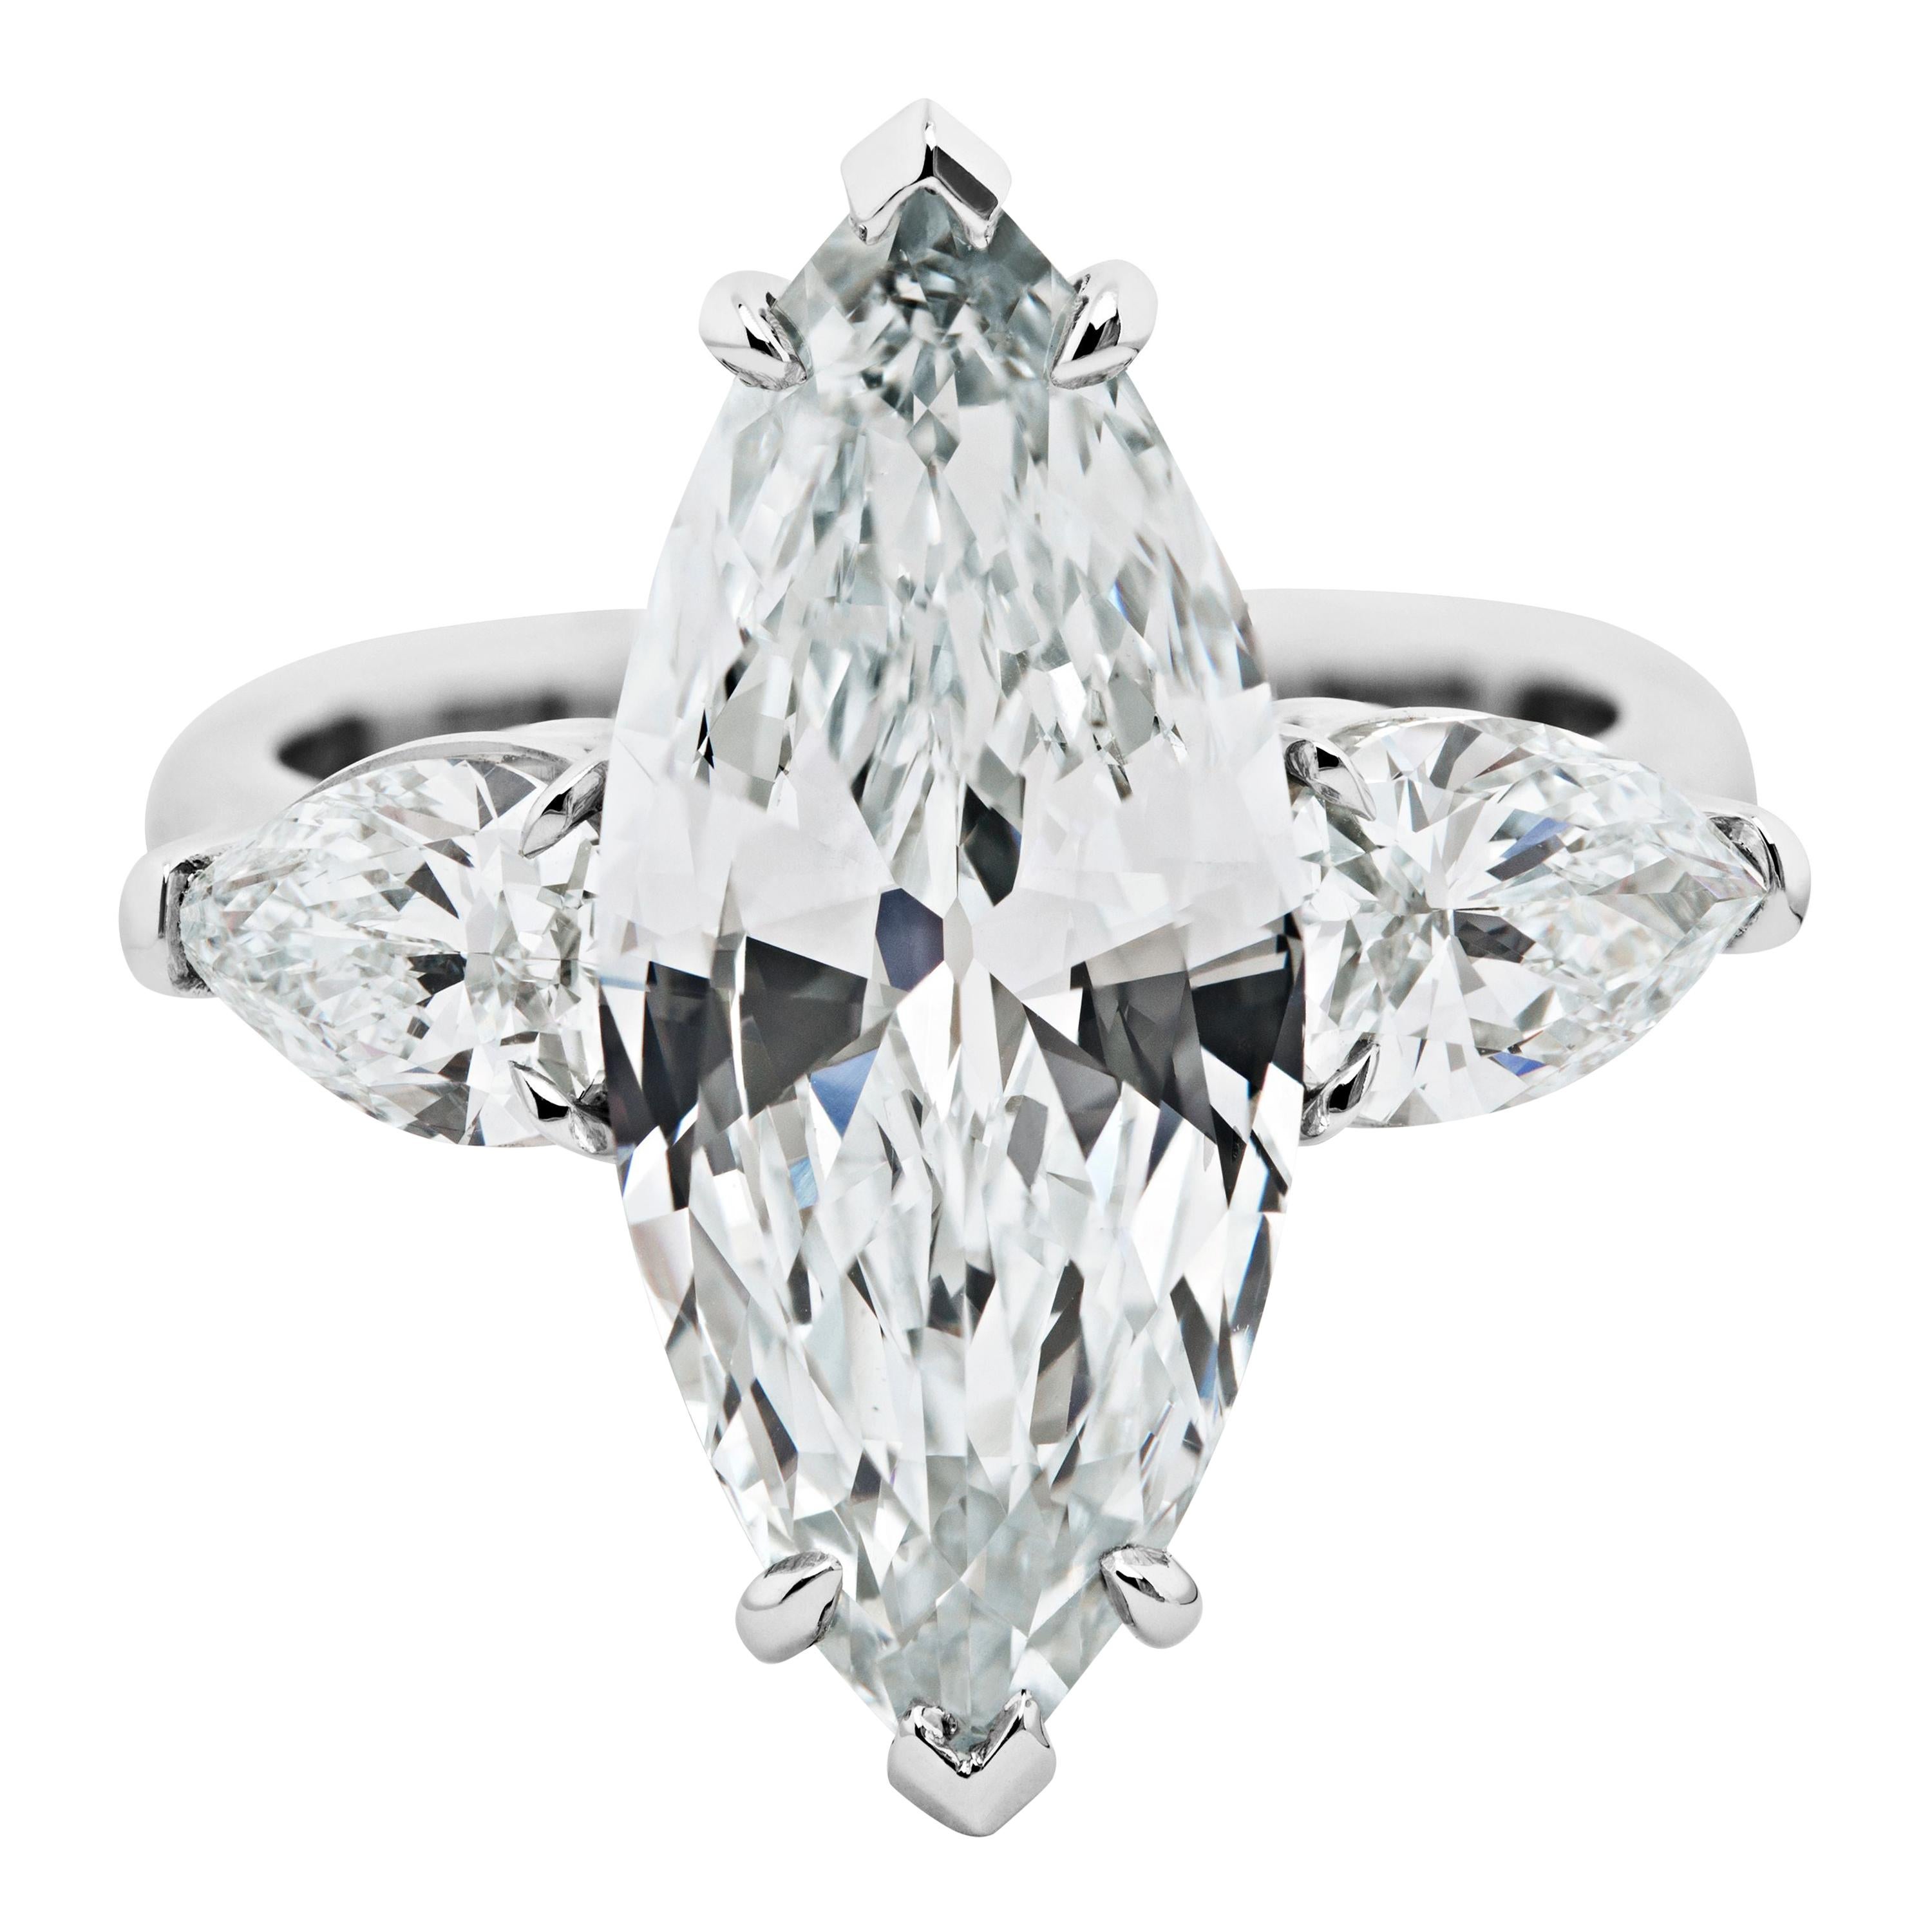 Ethonica GIA Certified Marquise Diamond Ring in 18 Karat Gold